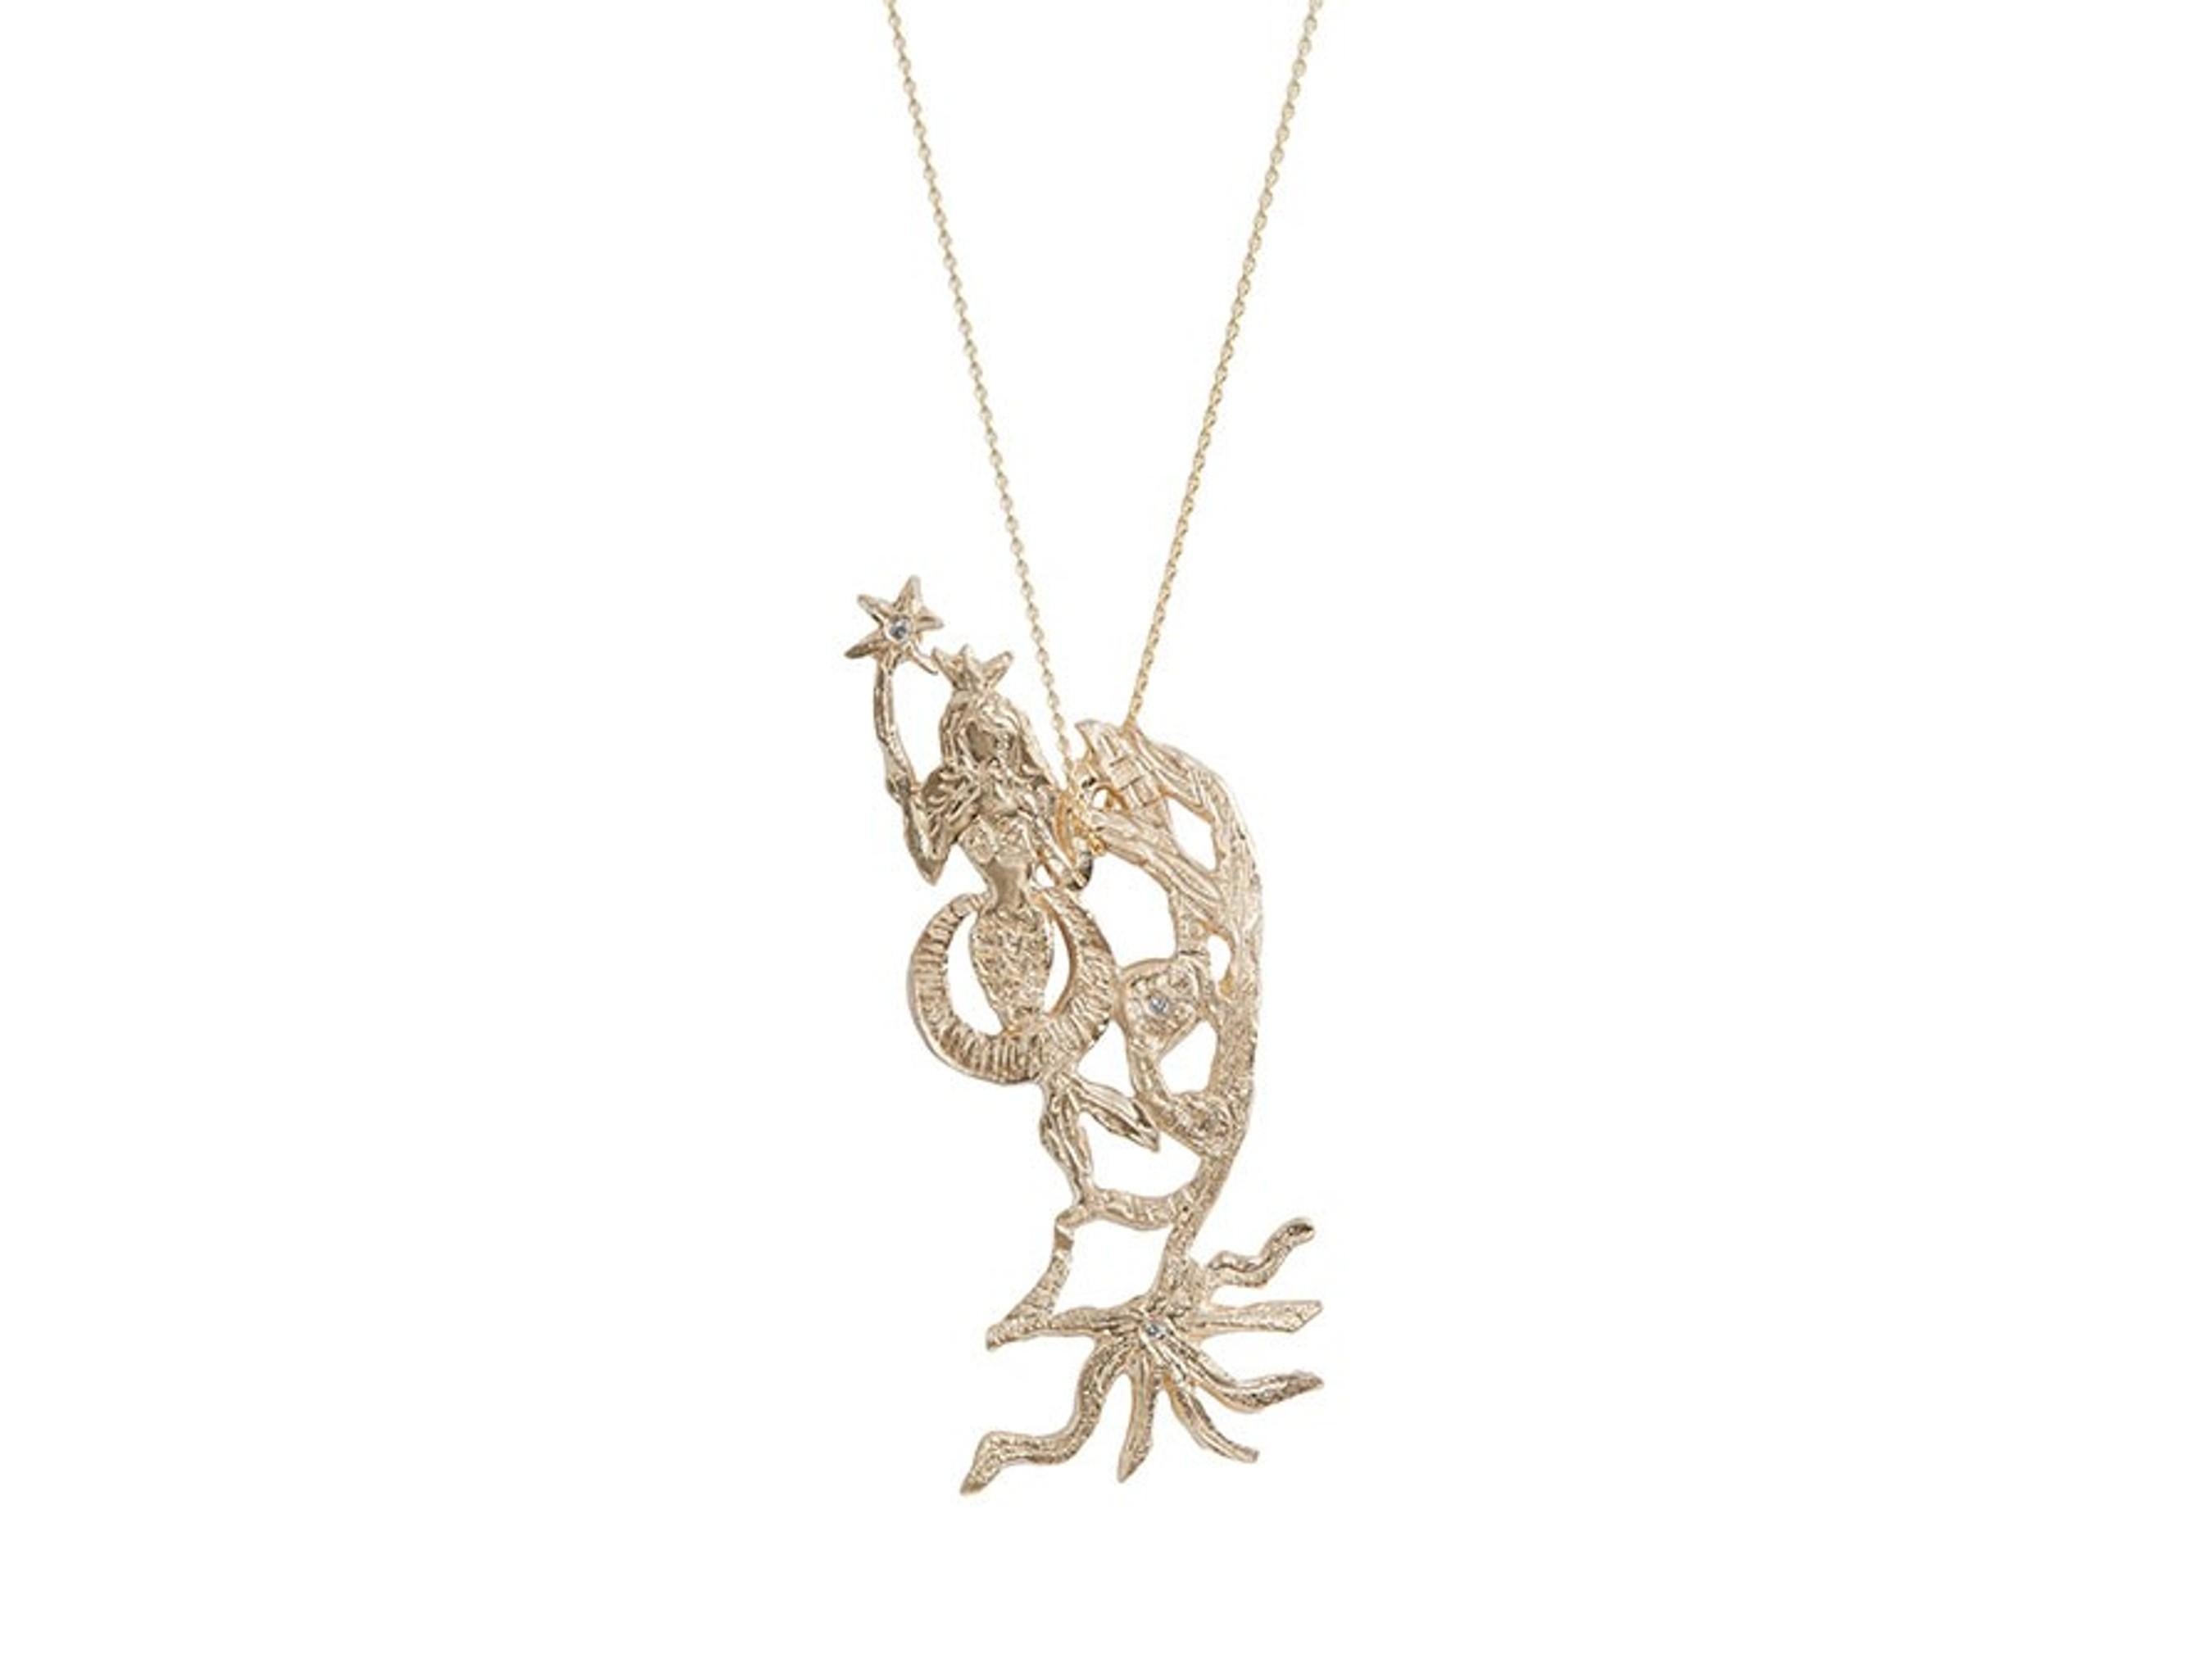 Absolutely gorgeous four diamond 14K yellow gold pendant necklace from Xiao Wang's Mermaid Collection. “This collection is inspired by the Japanese manga Mermaid Saga,” explains Wang. ”I wanted her to be magical, and so I placed a wand in her hand.